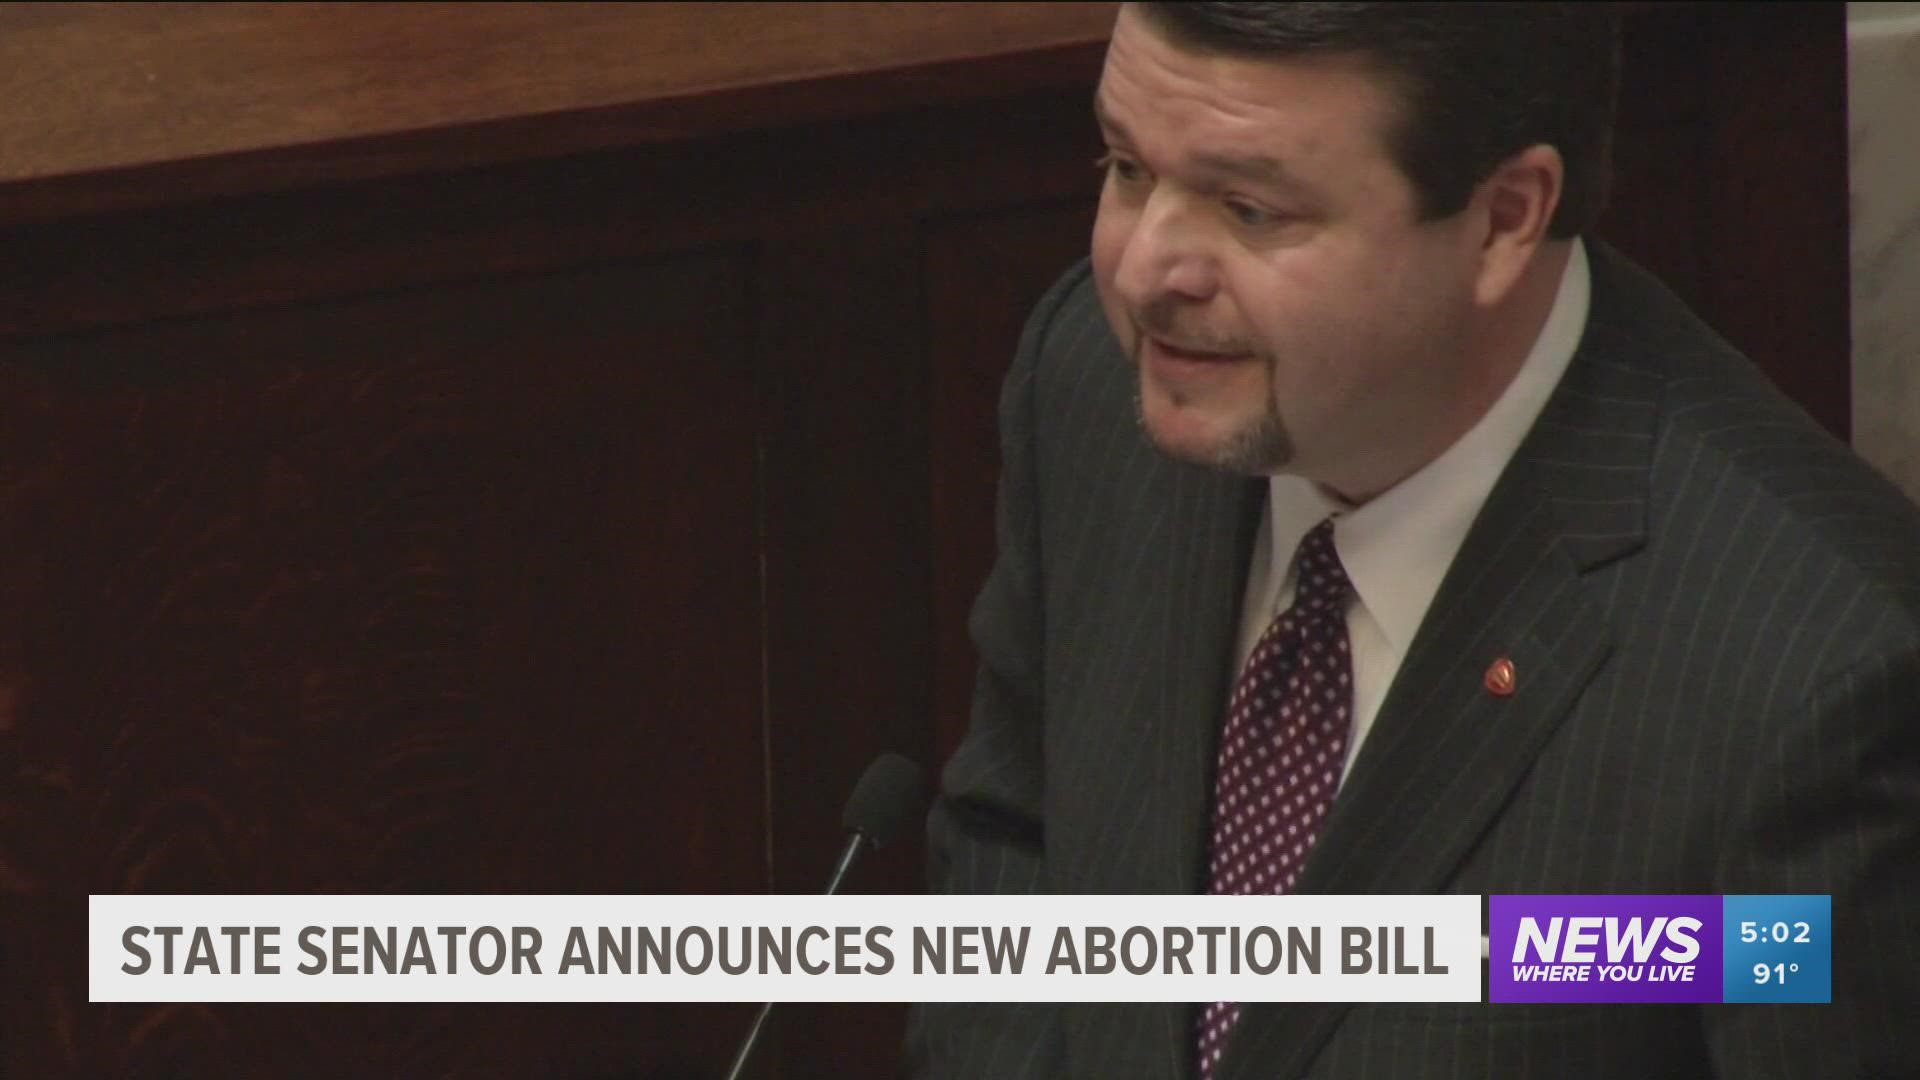 An Arkansas state senator wants to update Arkansas law to mirror Texas' restrictive abortion law that was left in place by the U.S. Supreme Court.